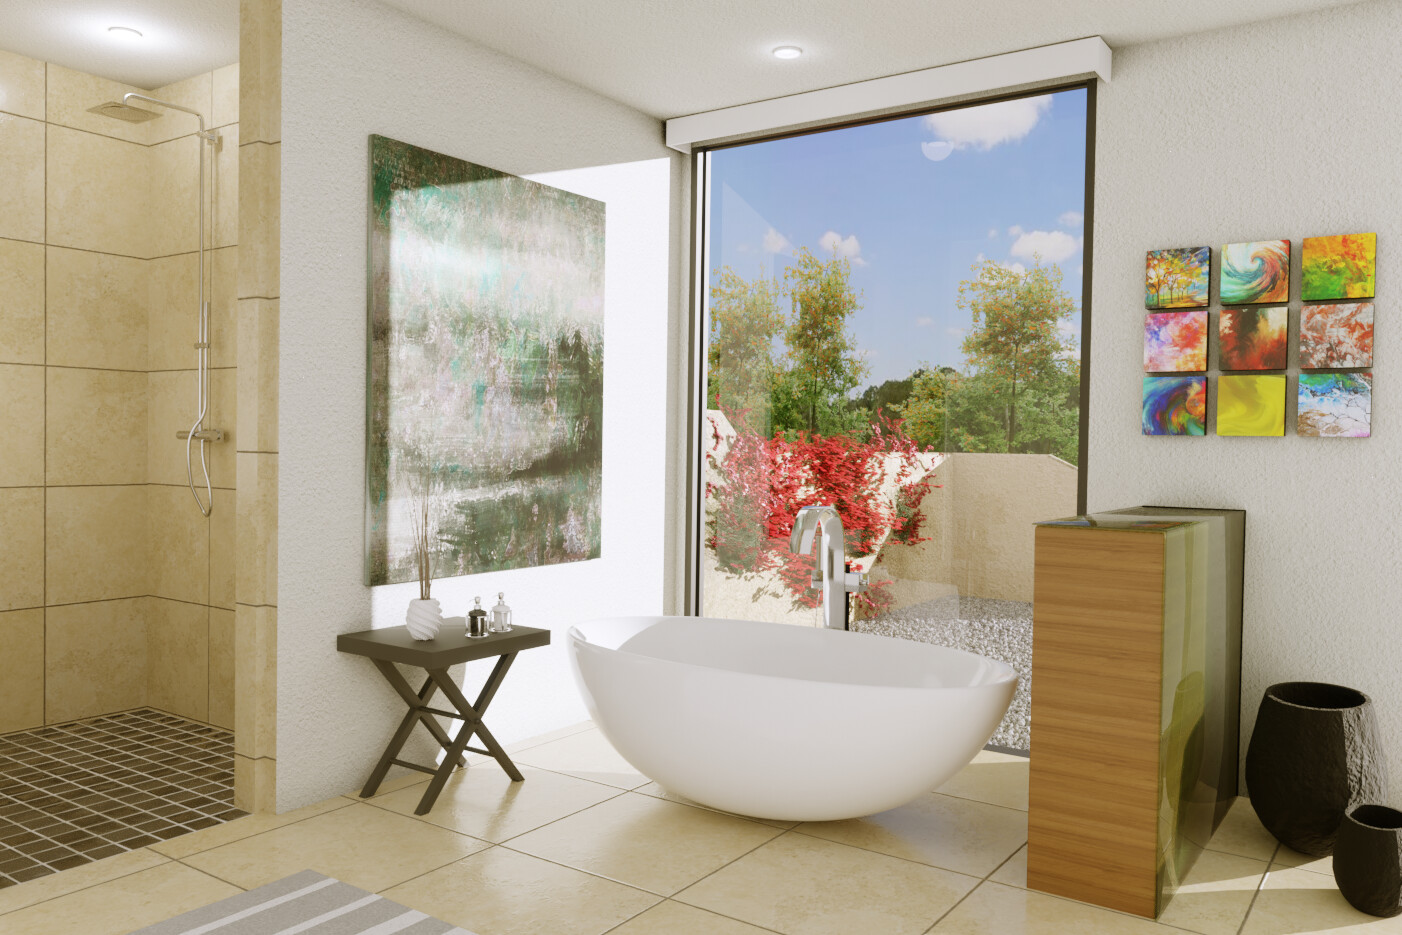 These Stunning Spanish Bathroom Décor Ideas Are Our Dream Relax Spot!